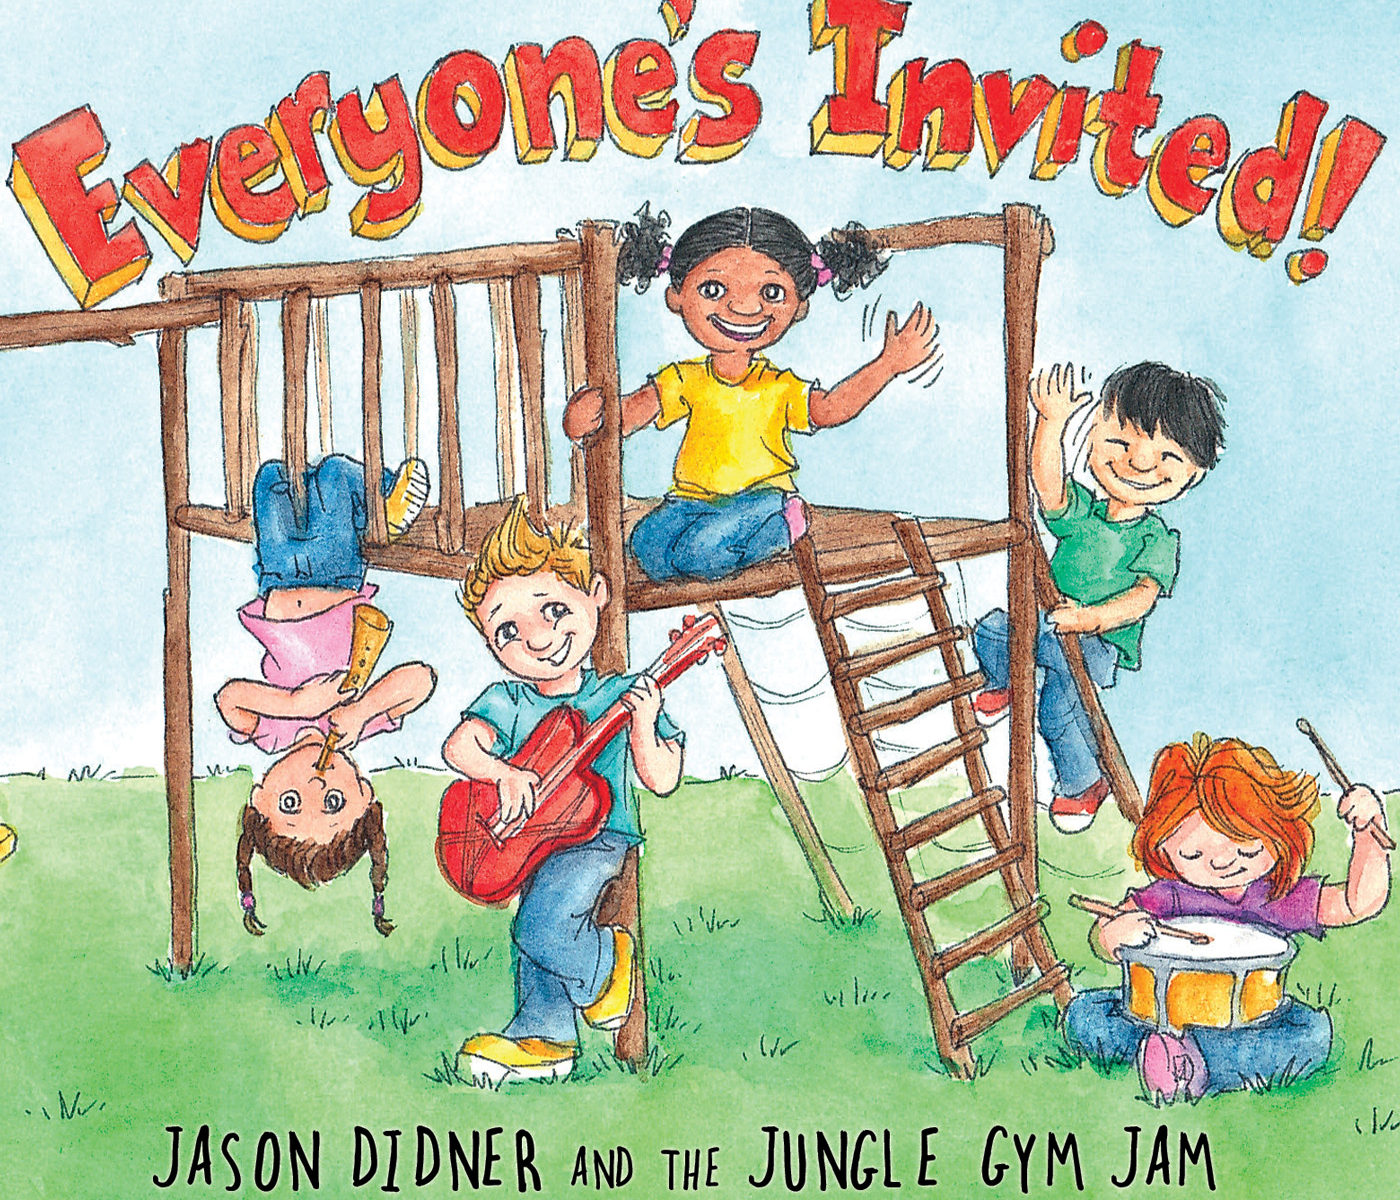 Everyone's Invited! album cover artwork - Jason Didner and the Jungle Gym Jam - illustrated by Melissa Bailey